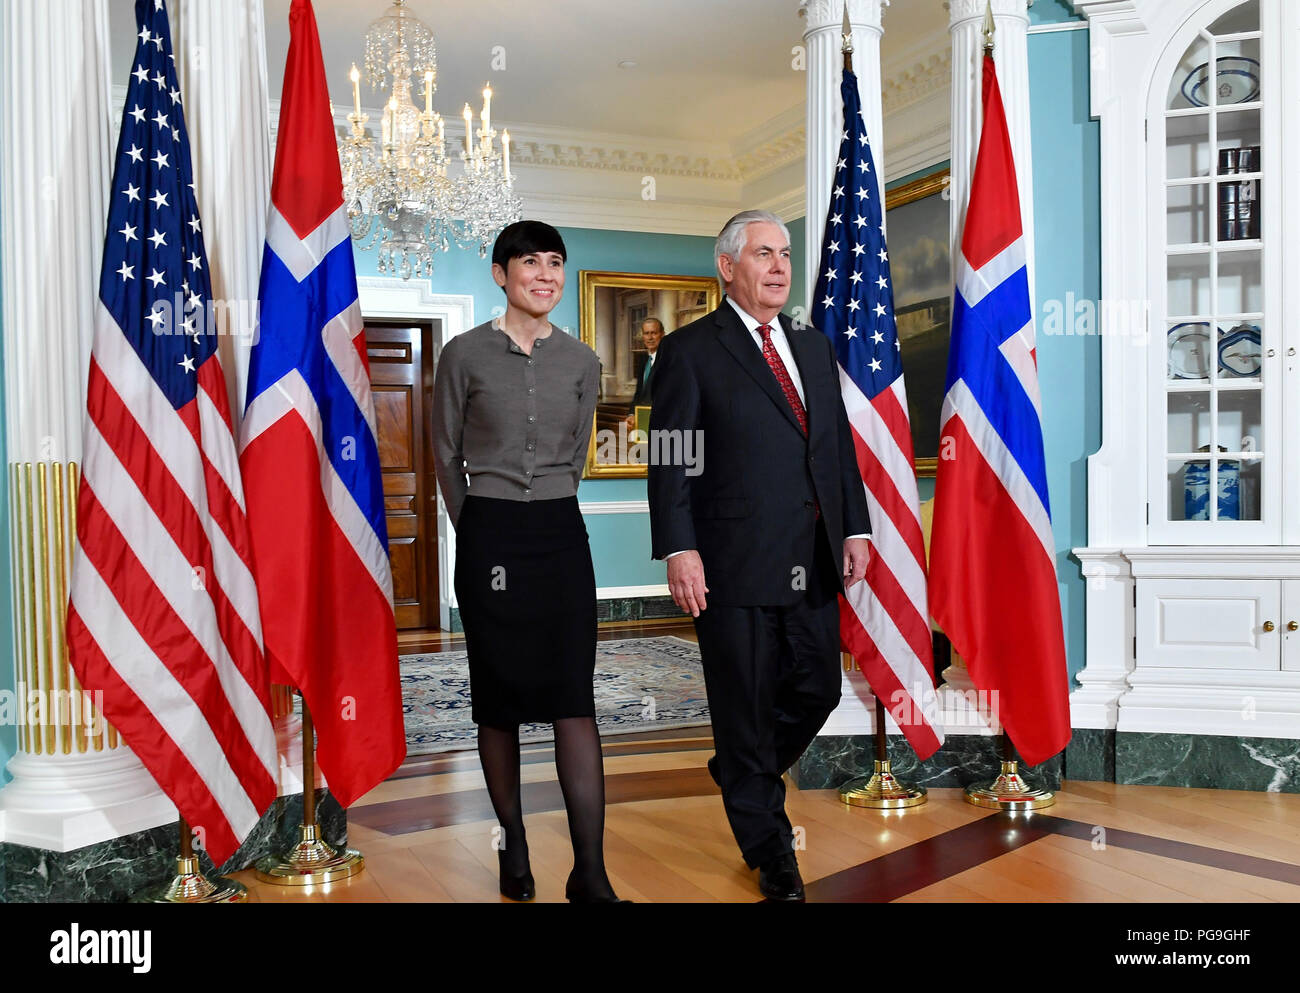 U.S. Secretary of State Rex Tillerson and Norwegian Foreign Minister Ine Marie Eriksen Søreide prepare to address reporters at the U.S. Department of State in Washington, D.C. on January 11, 2018. Stock Photo